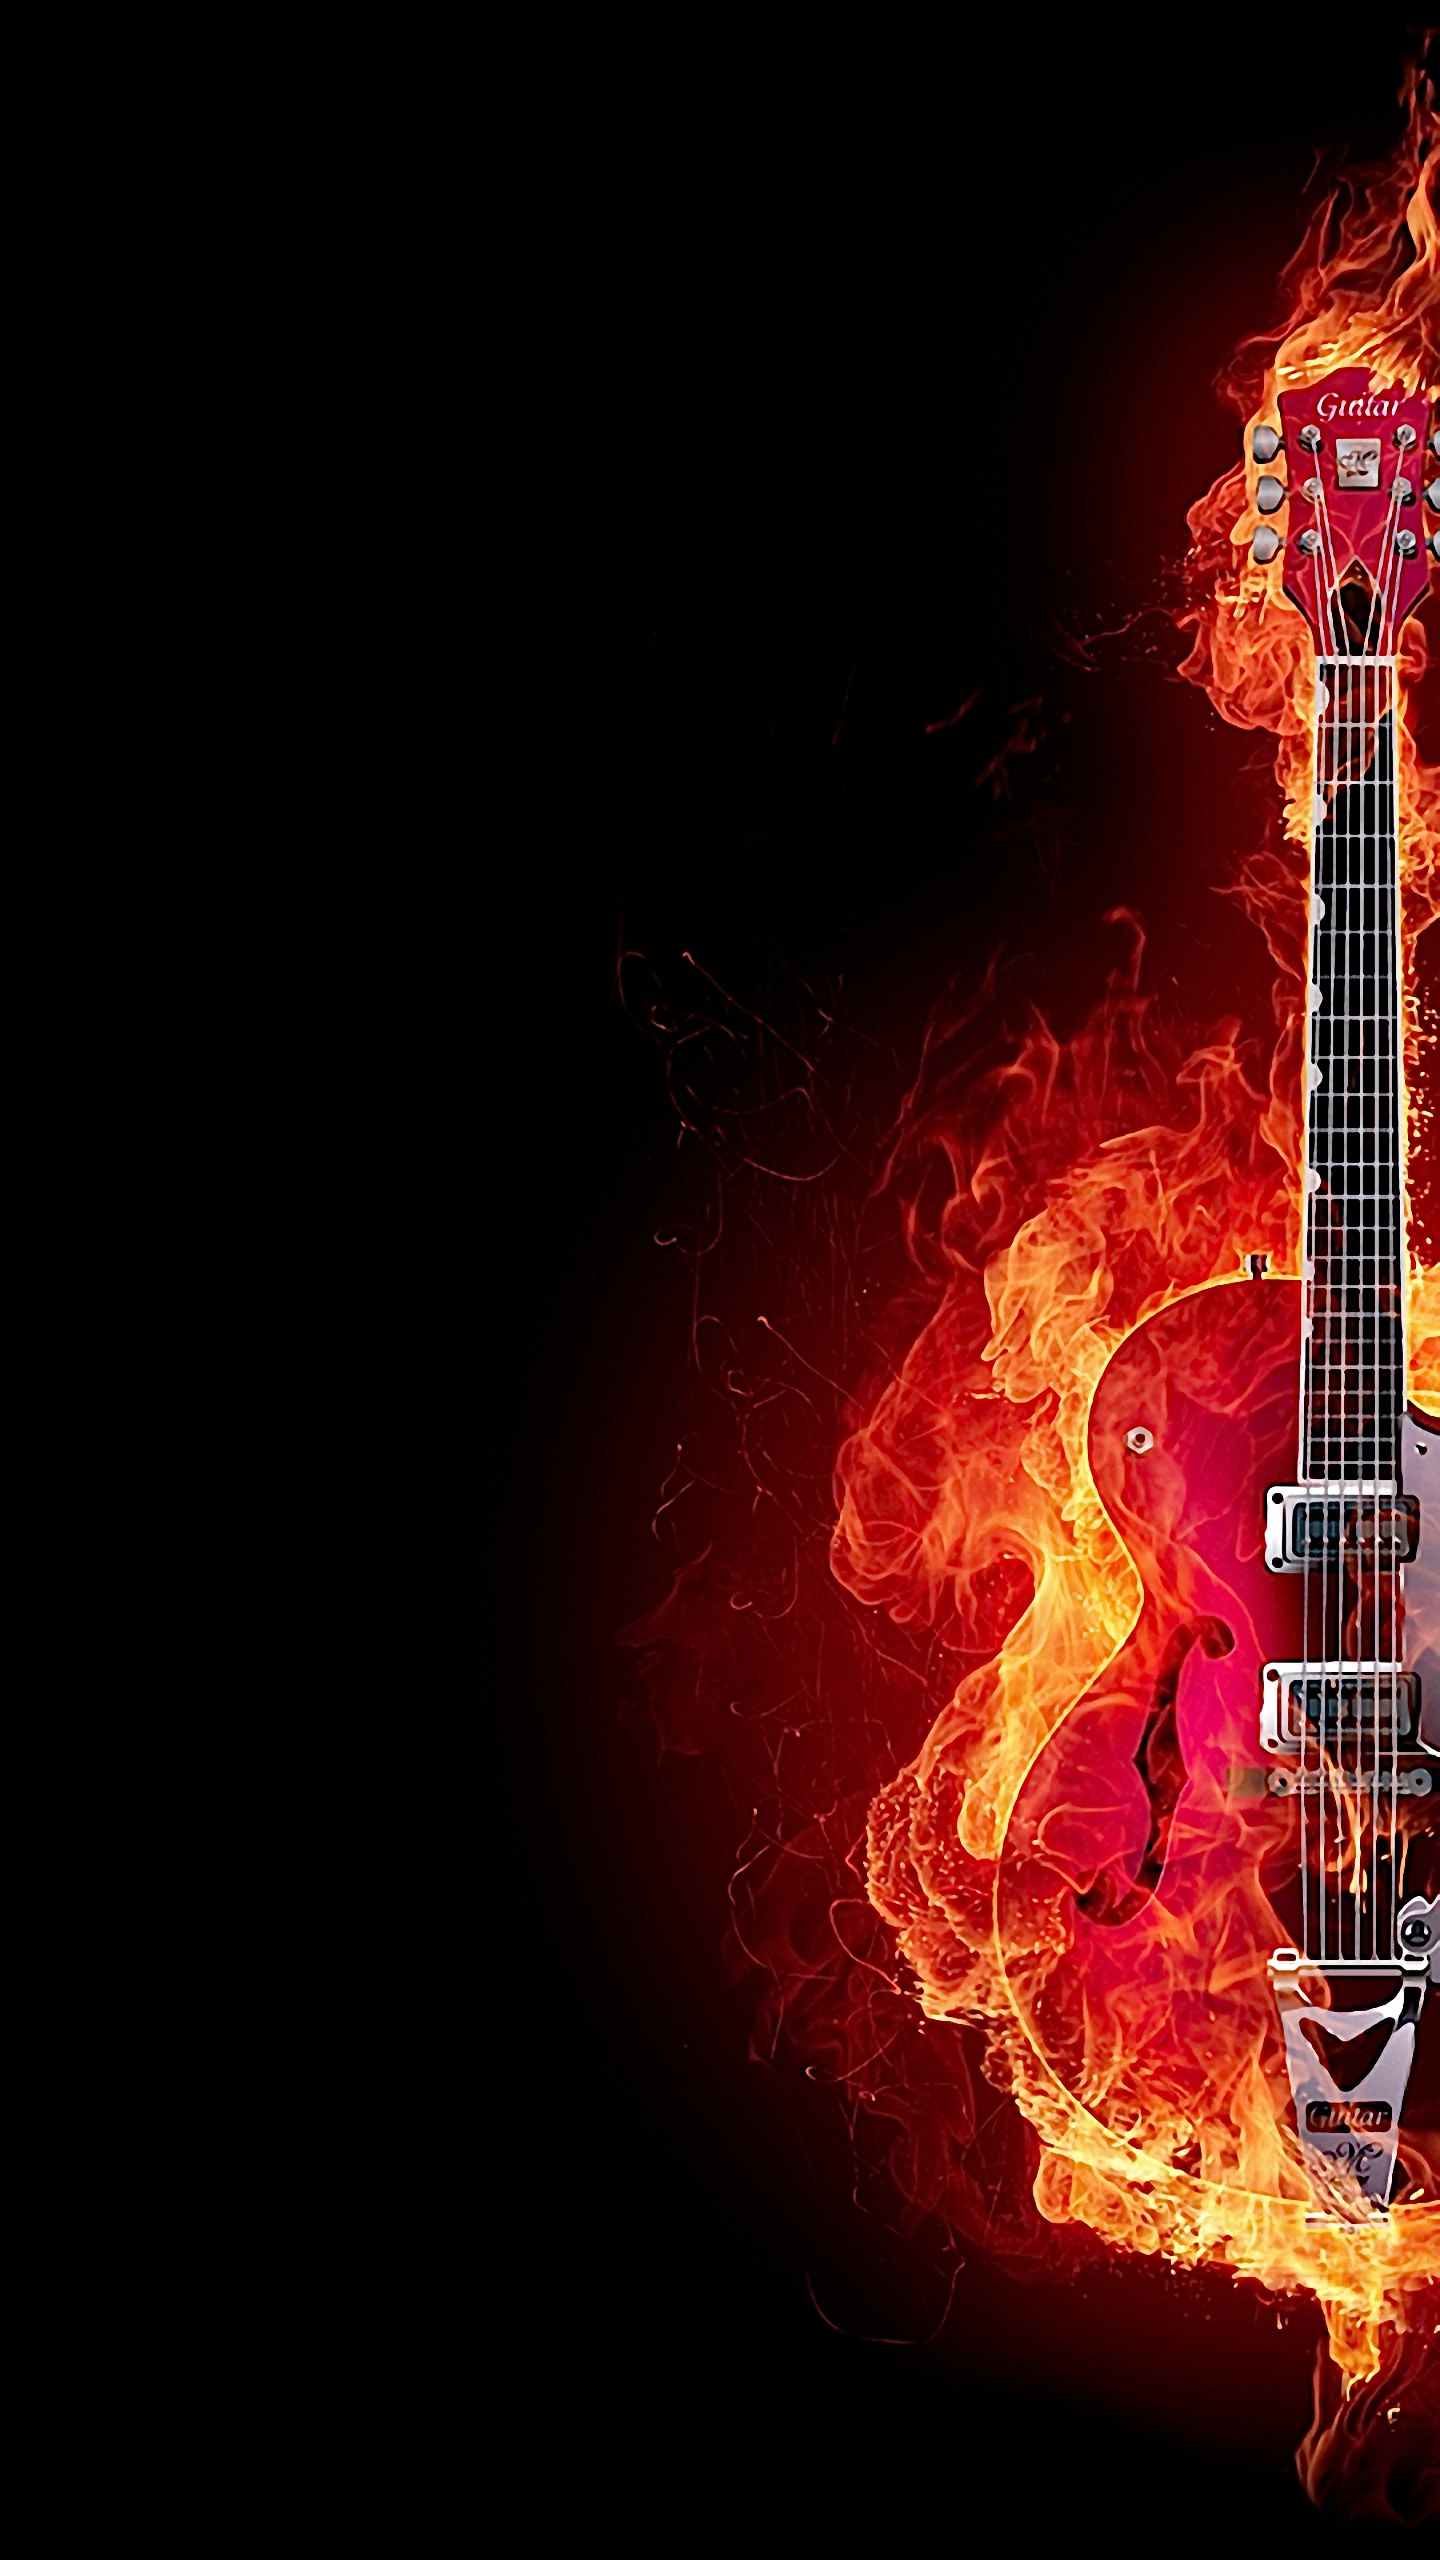 your lg g3 hd 1440x2560 flaming guitar lg g3 wallpapers